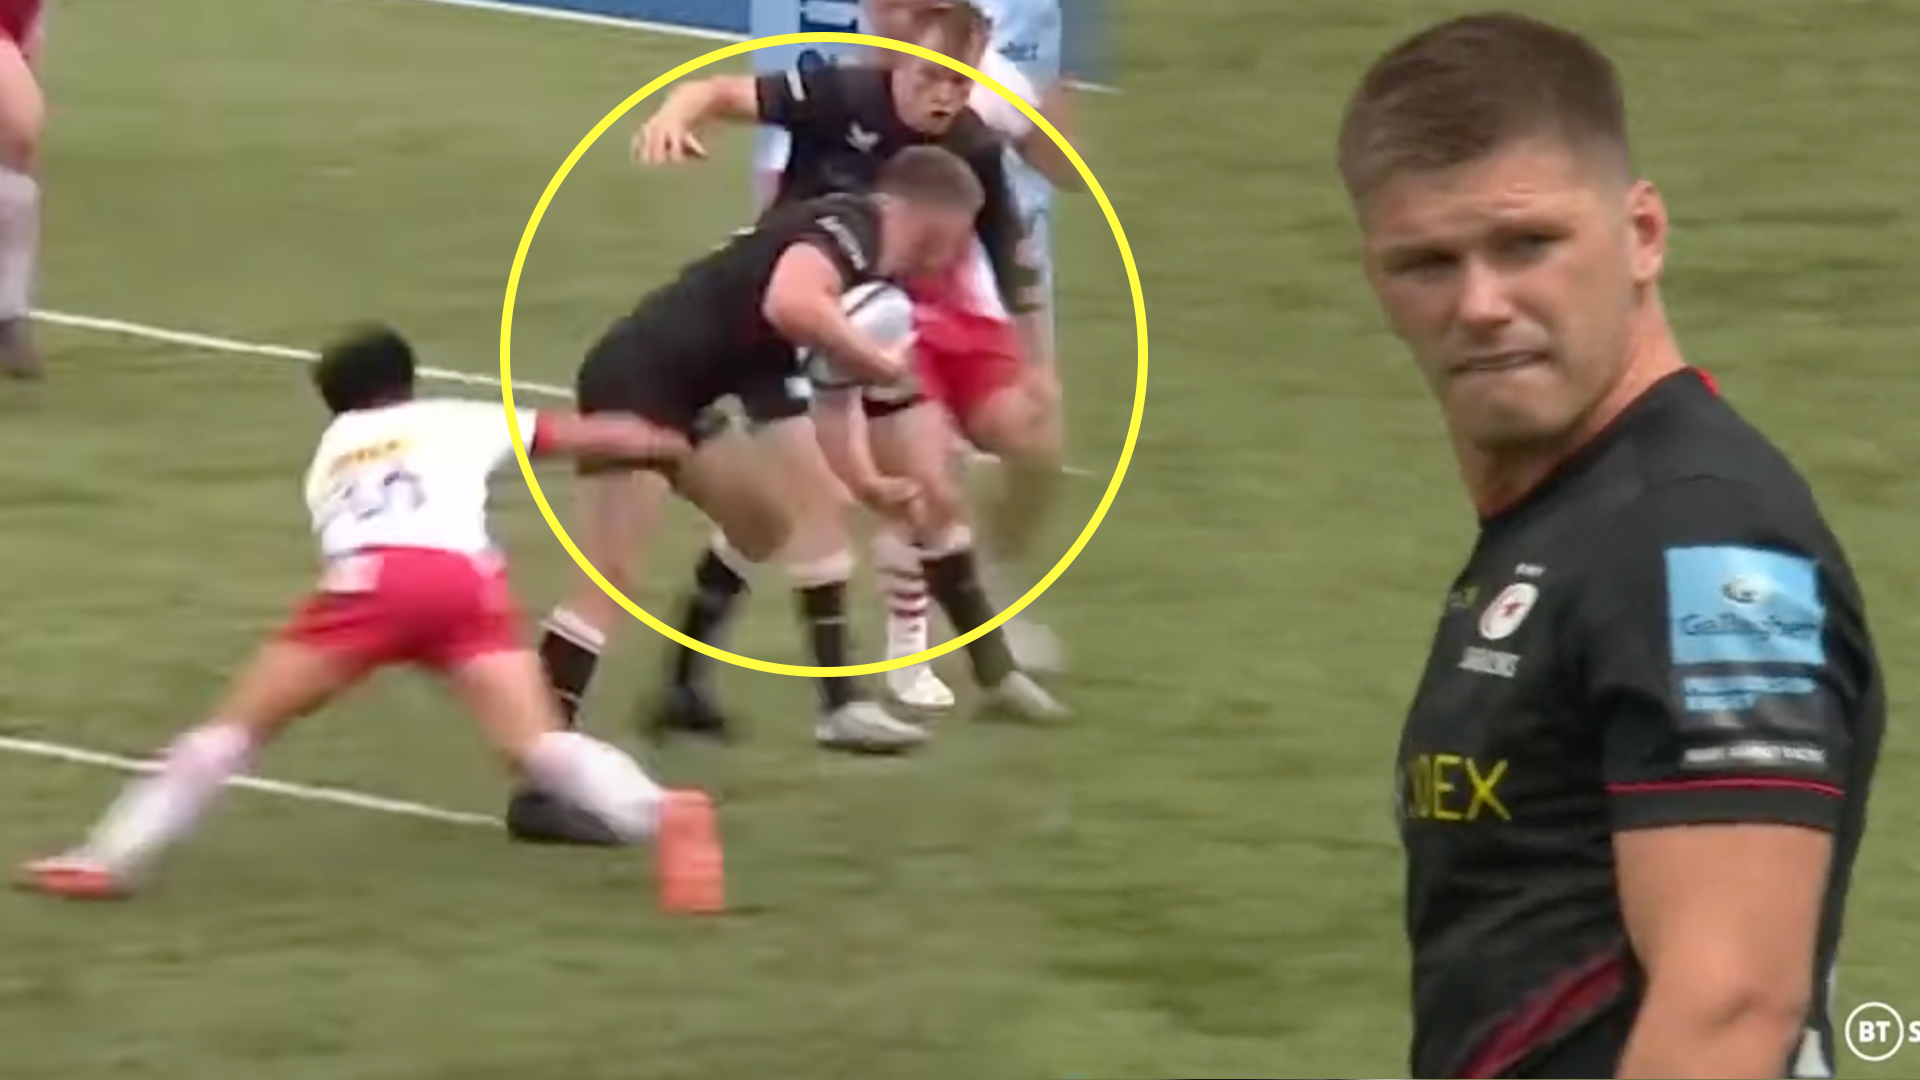 Owen Farrell proves he's more skilful than Marcus Smith